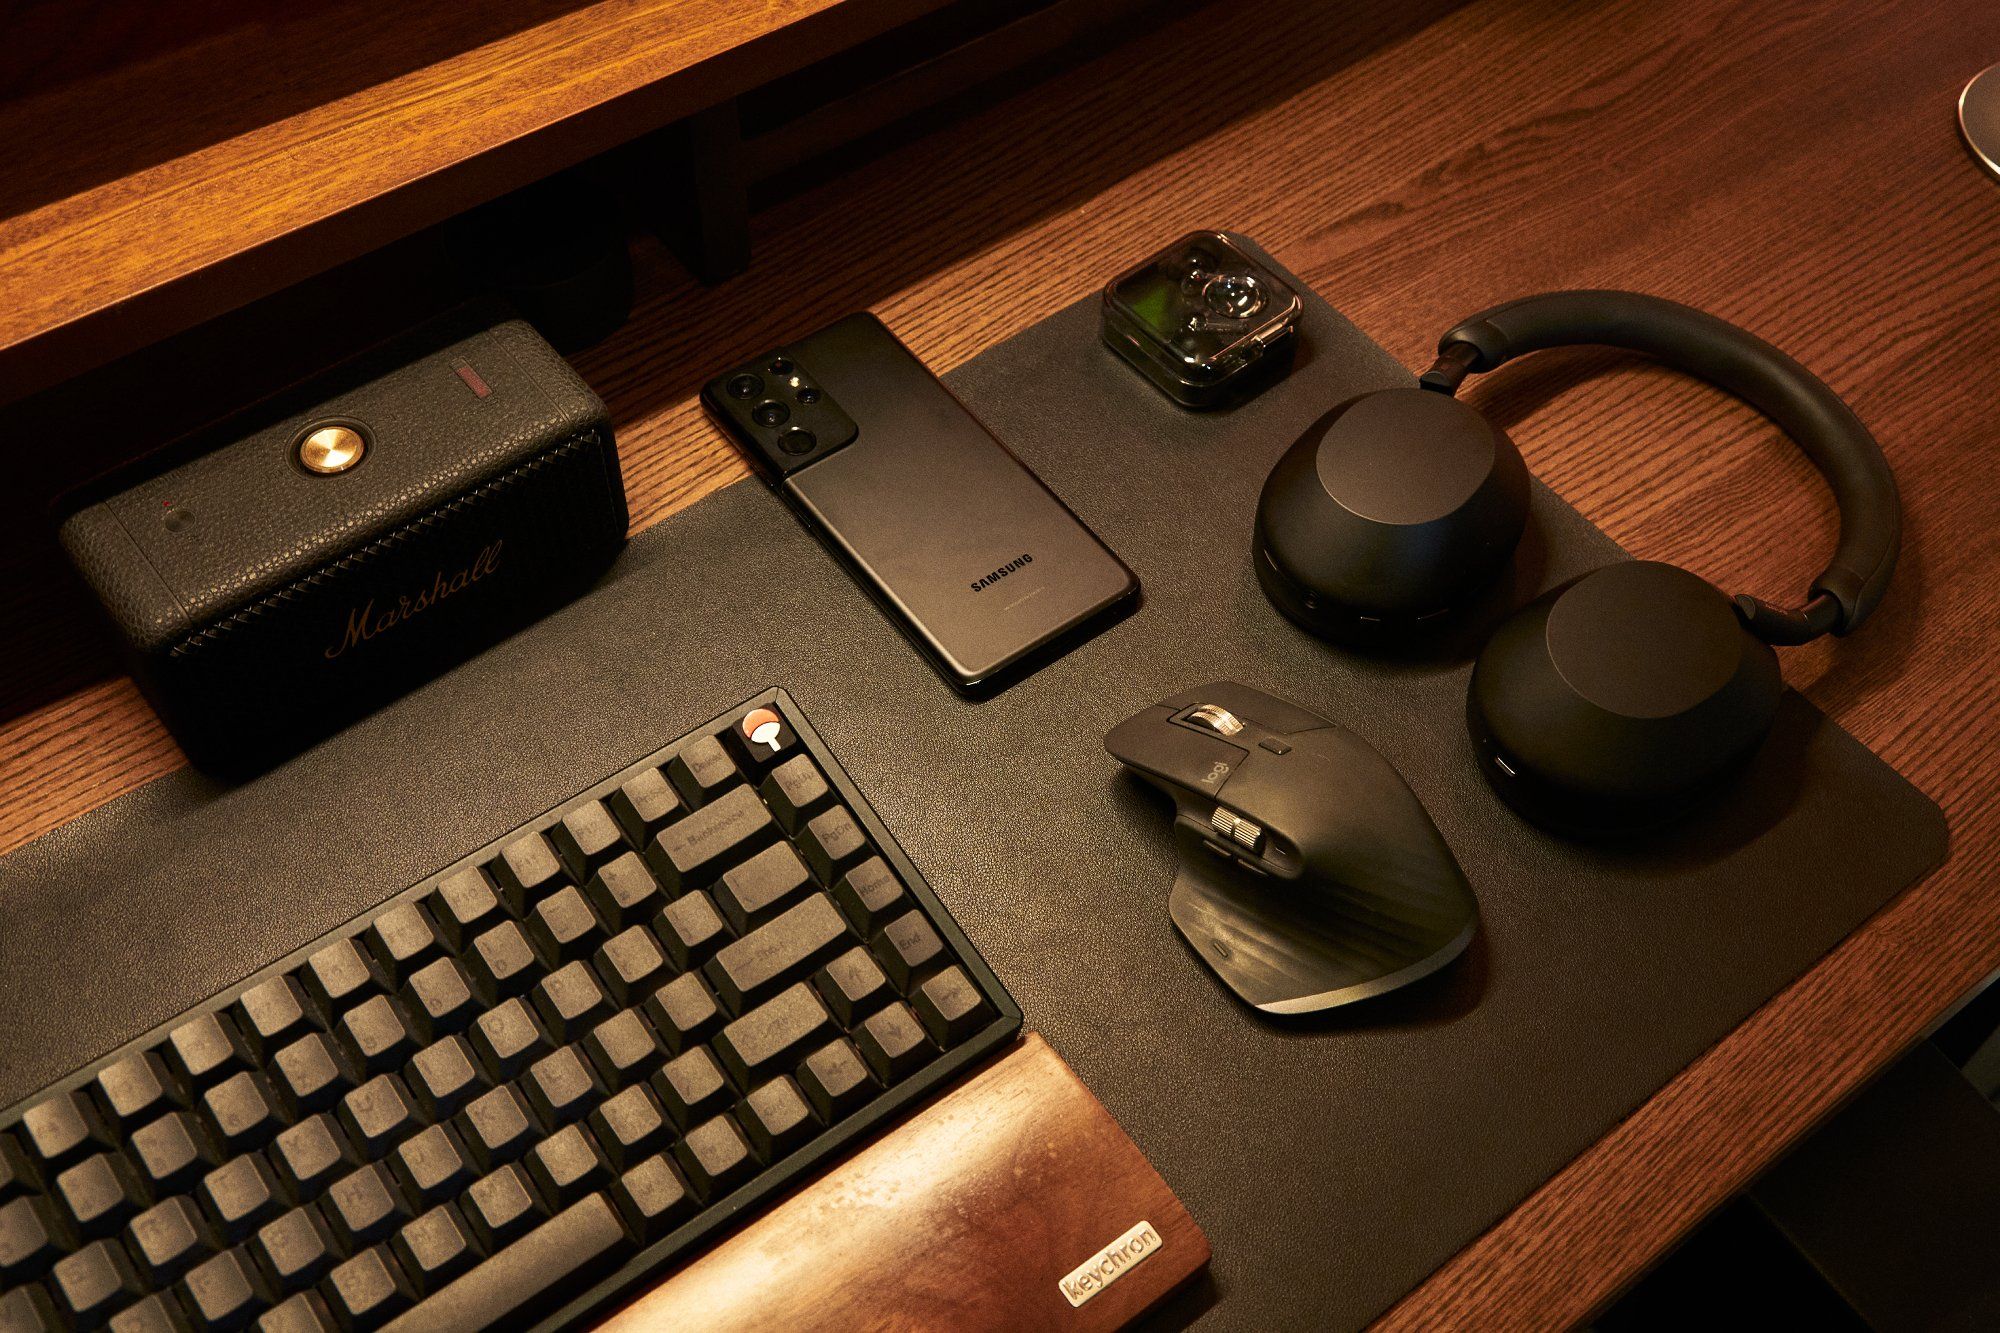 A Keychron K2 keyboard, Logitech MX Master3 mouse, Marshall speaker, Sony headphones, and Samsung smartphone on the home office desk